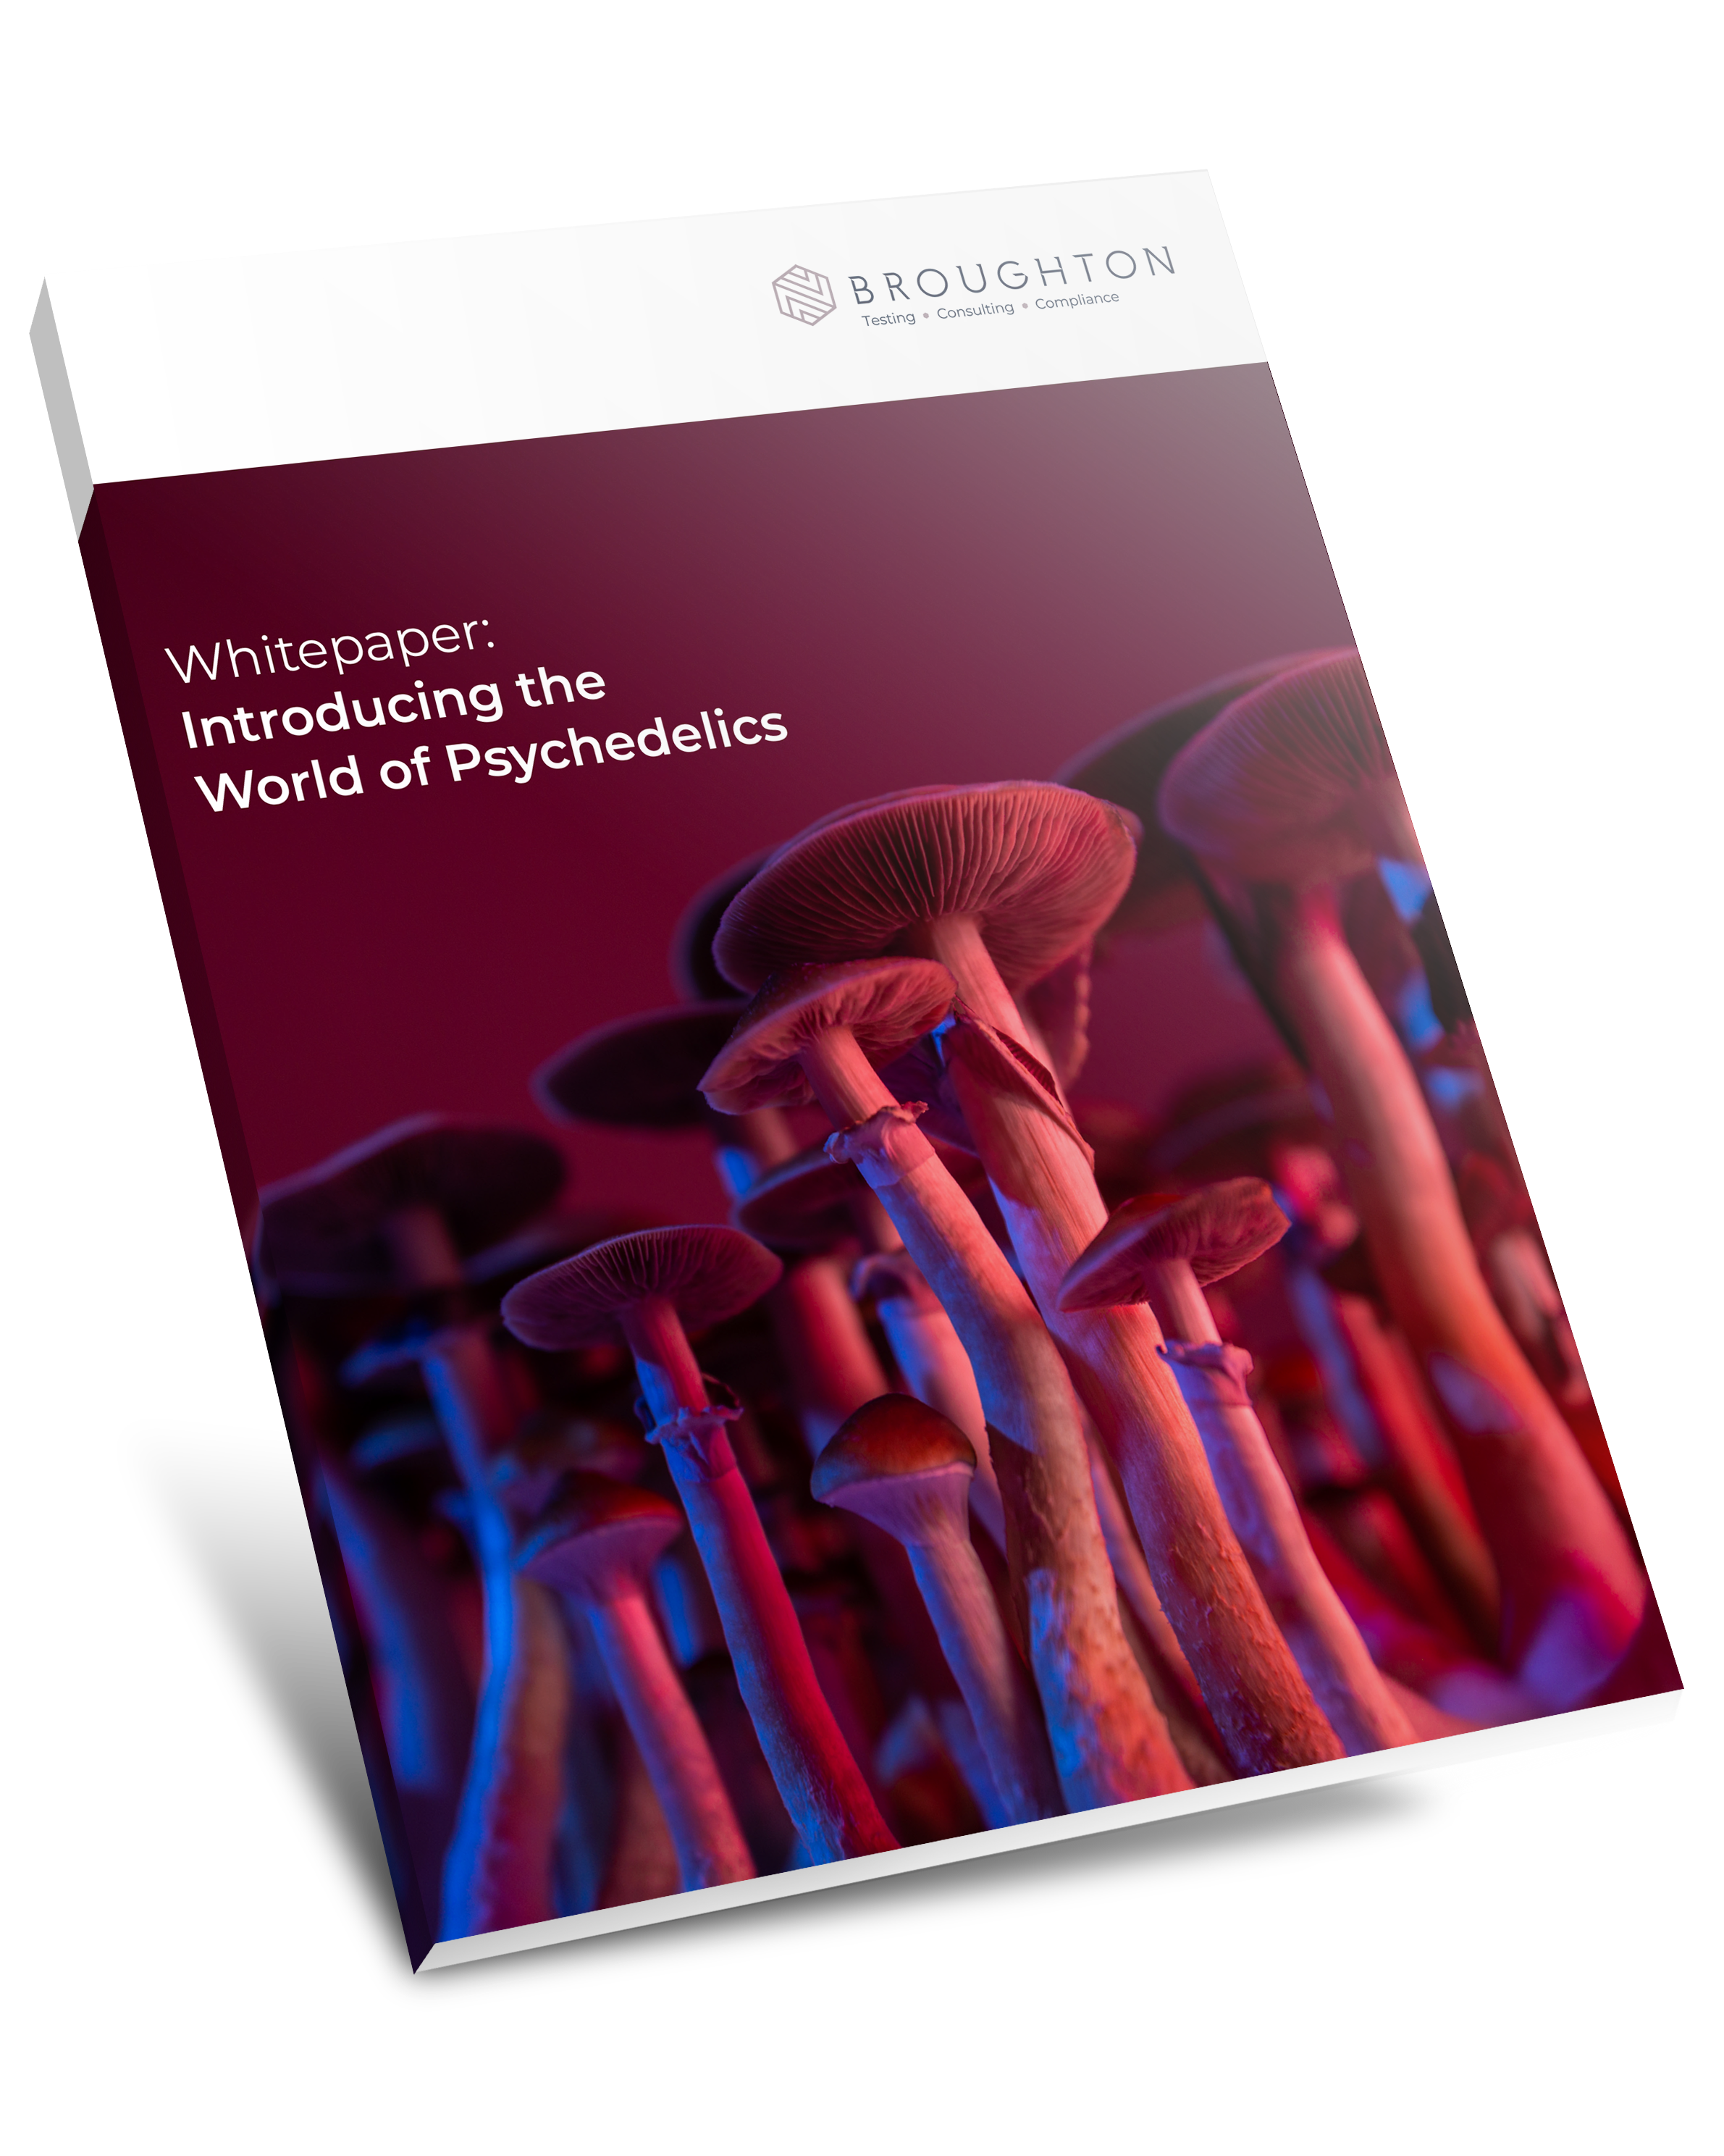 Whitepaper:-Introducing-the-World-of-Psychedelics-|-Broughton